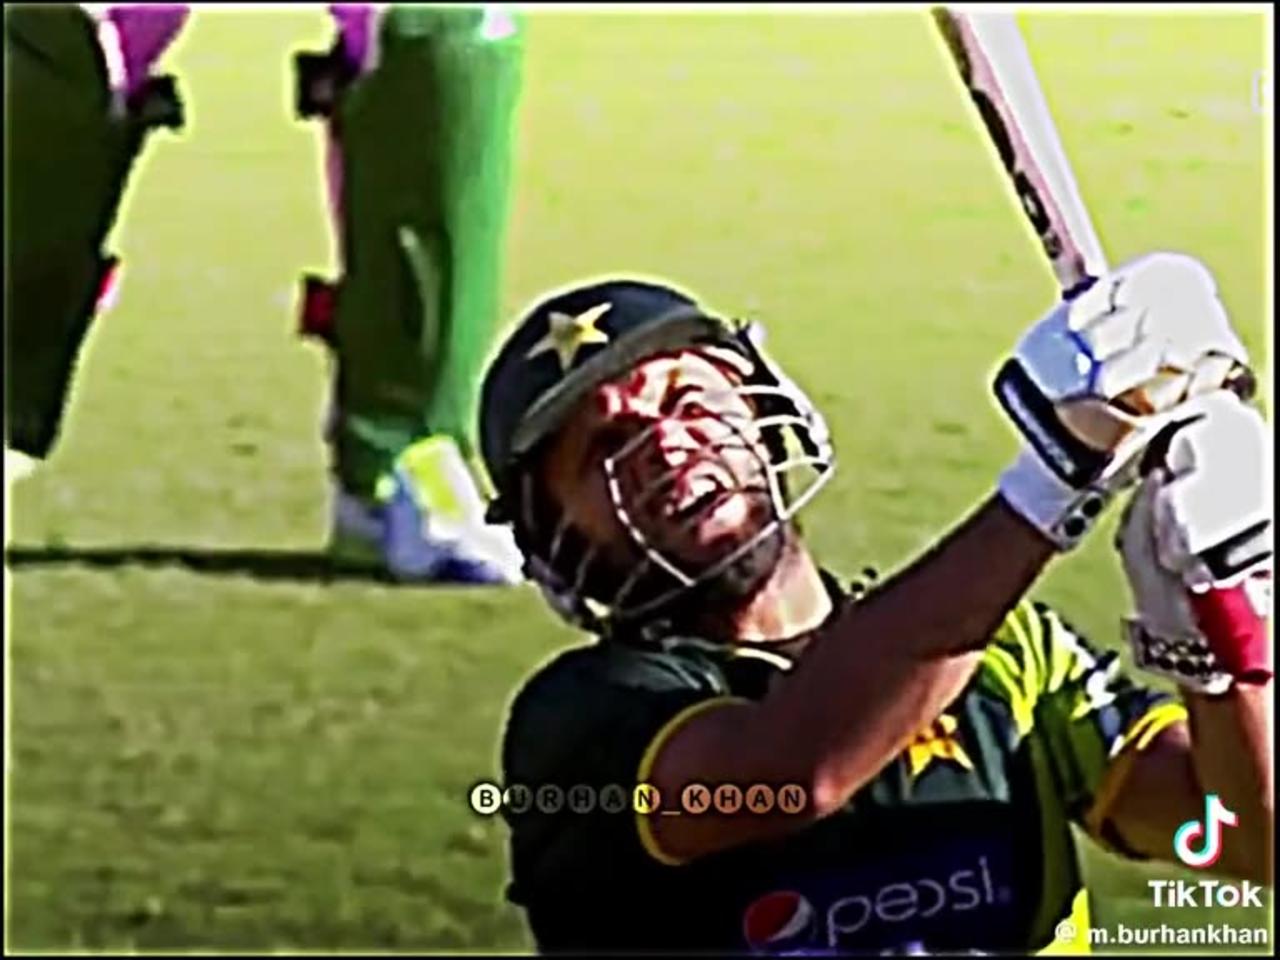 Biggest six in cricket history by Shahid Afridi. Great revenge taken by afridi